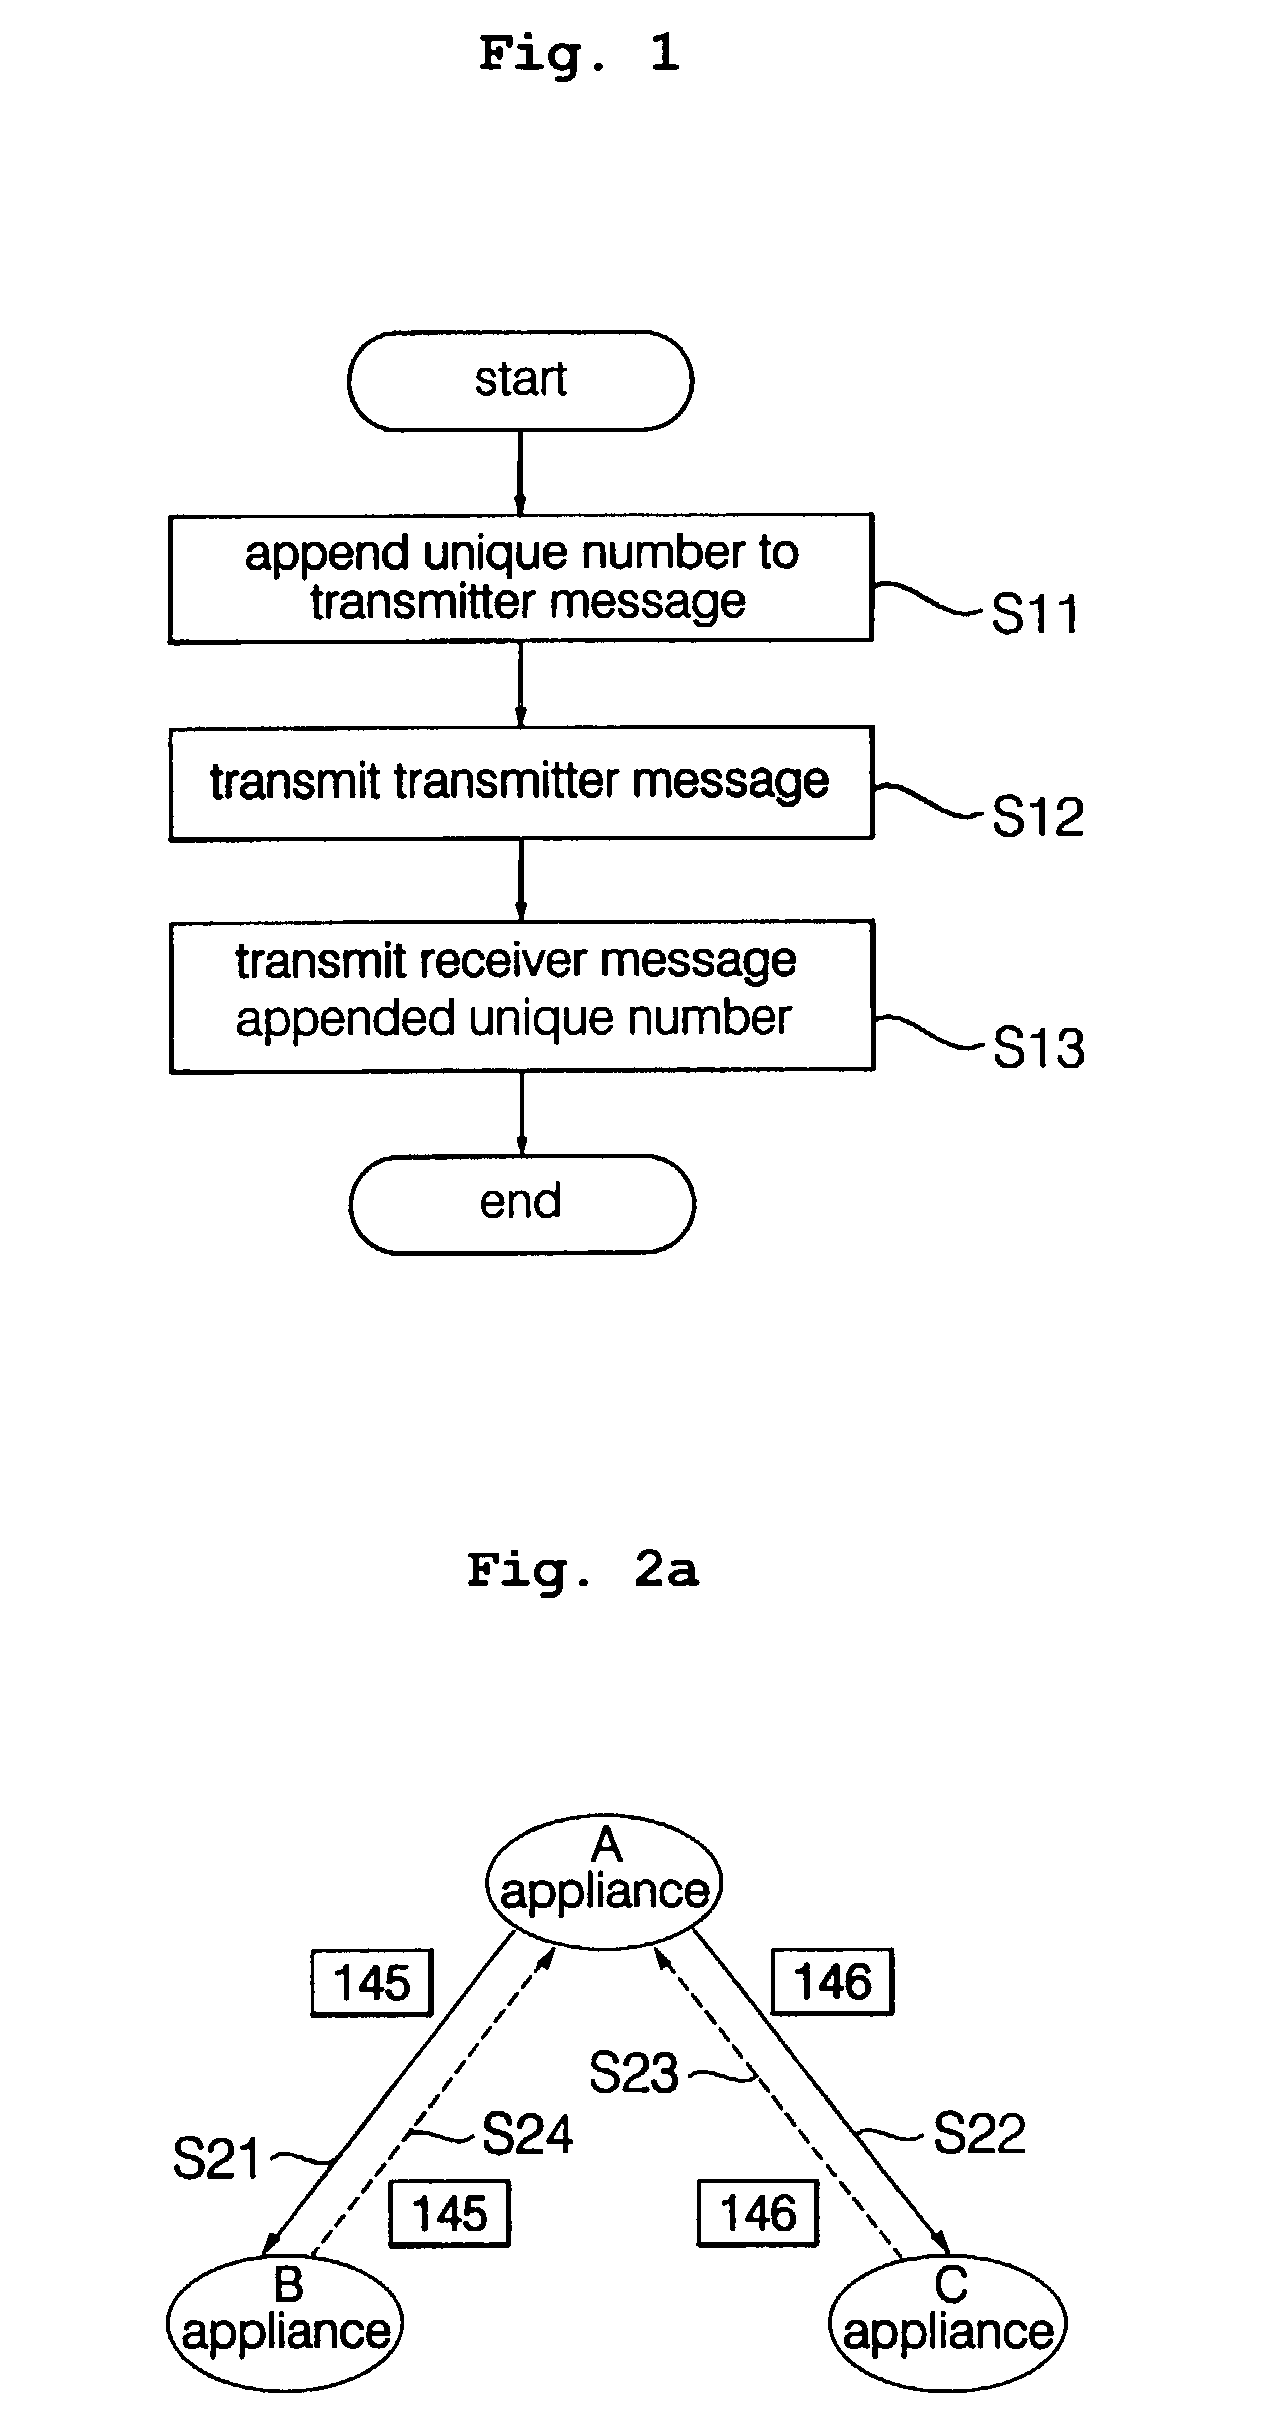 Method for transmitting and receiving messages in home appliance networking system